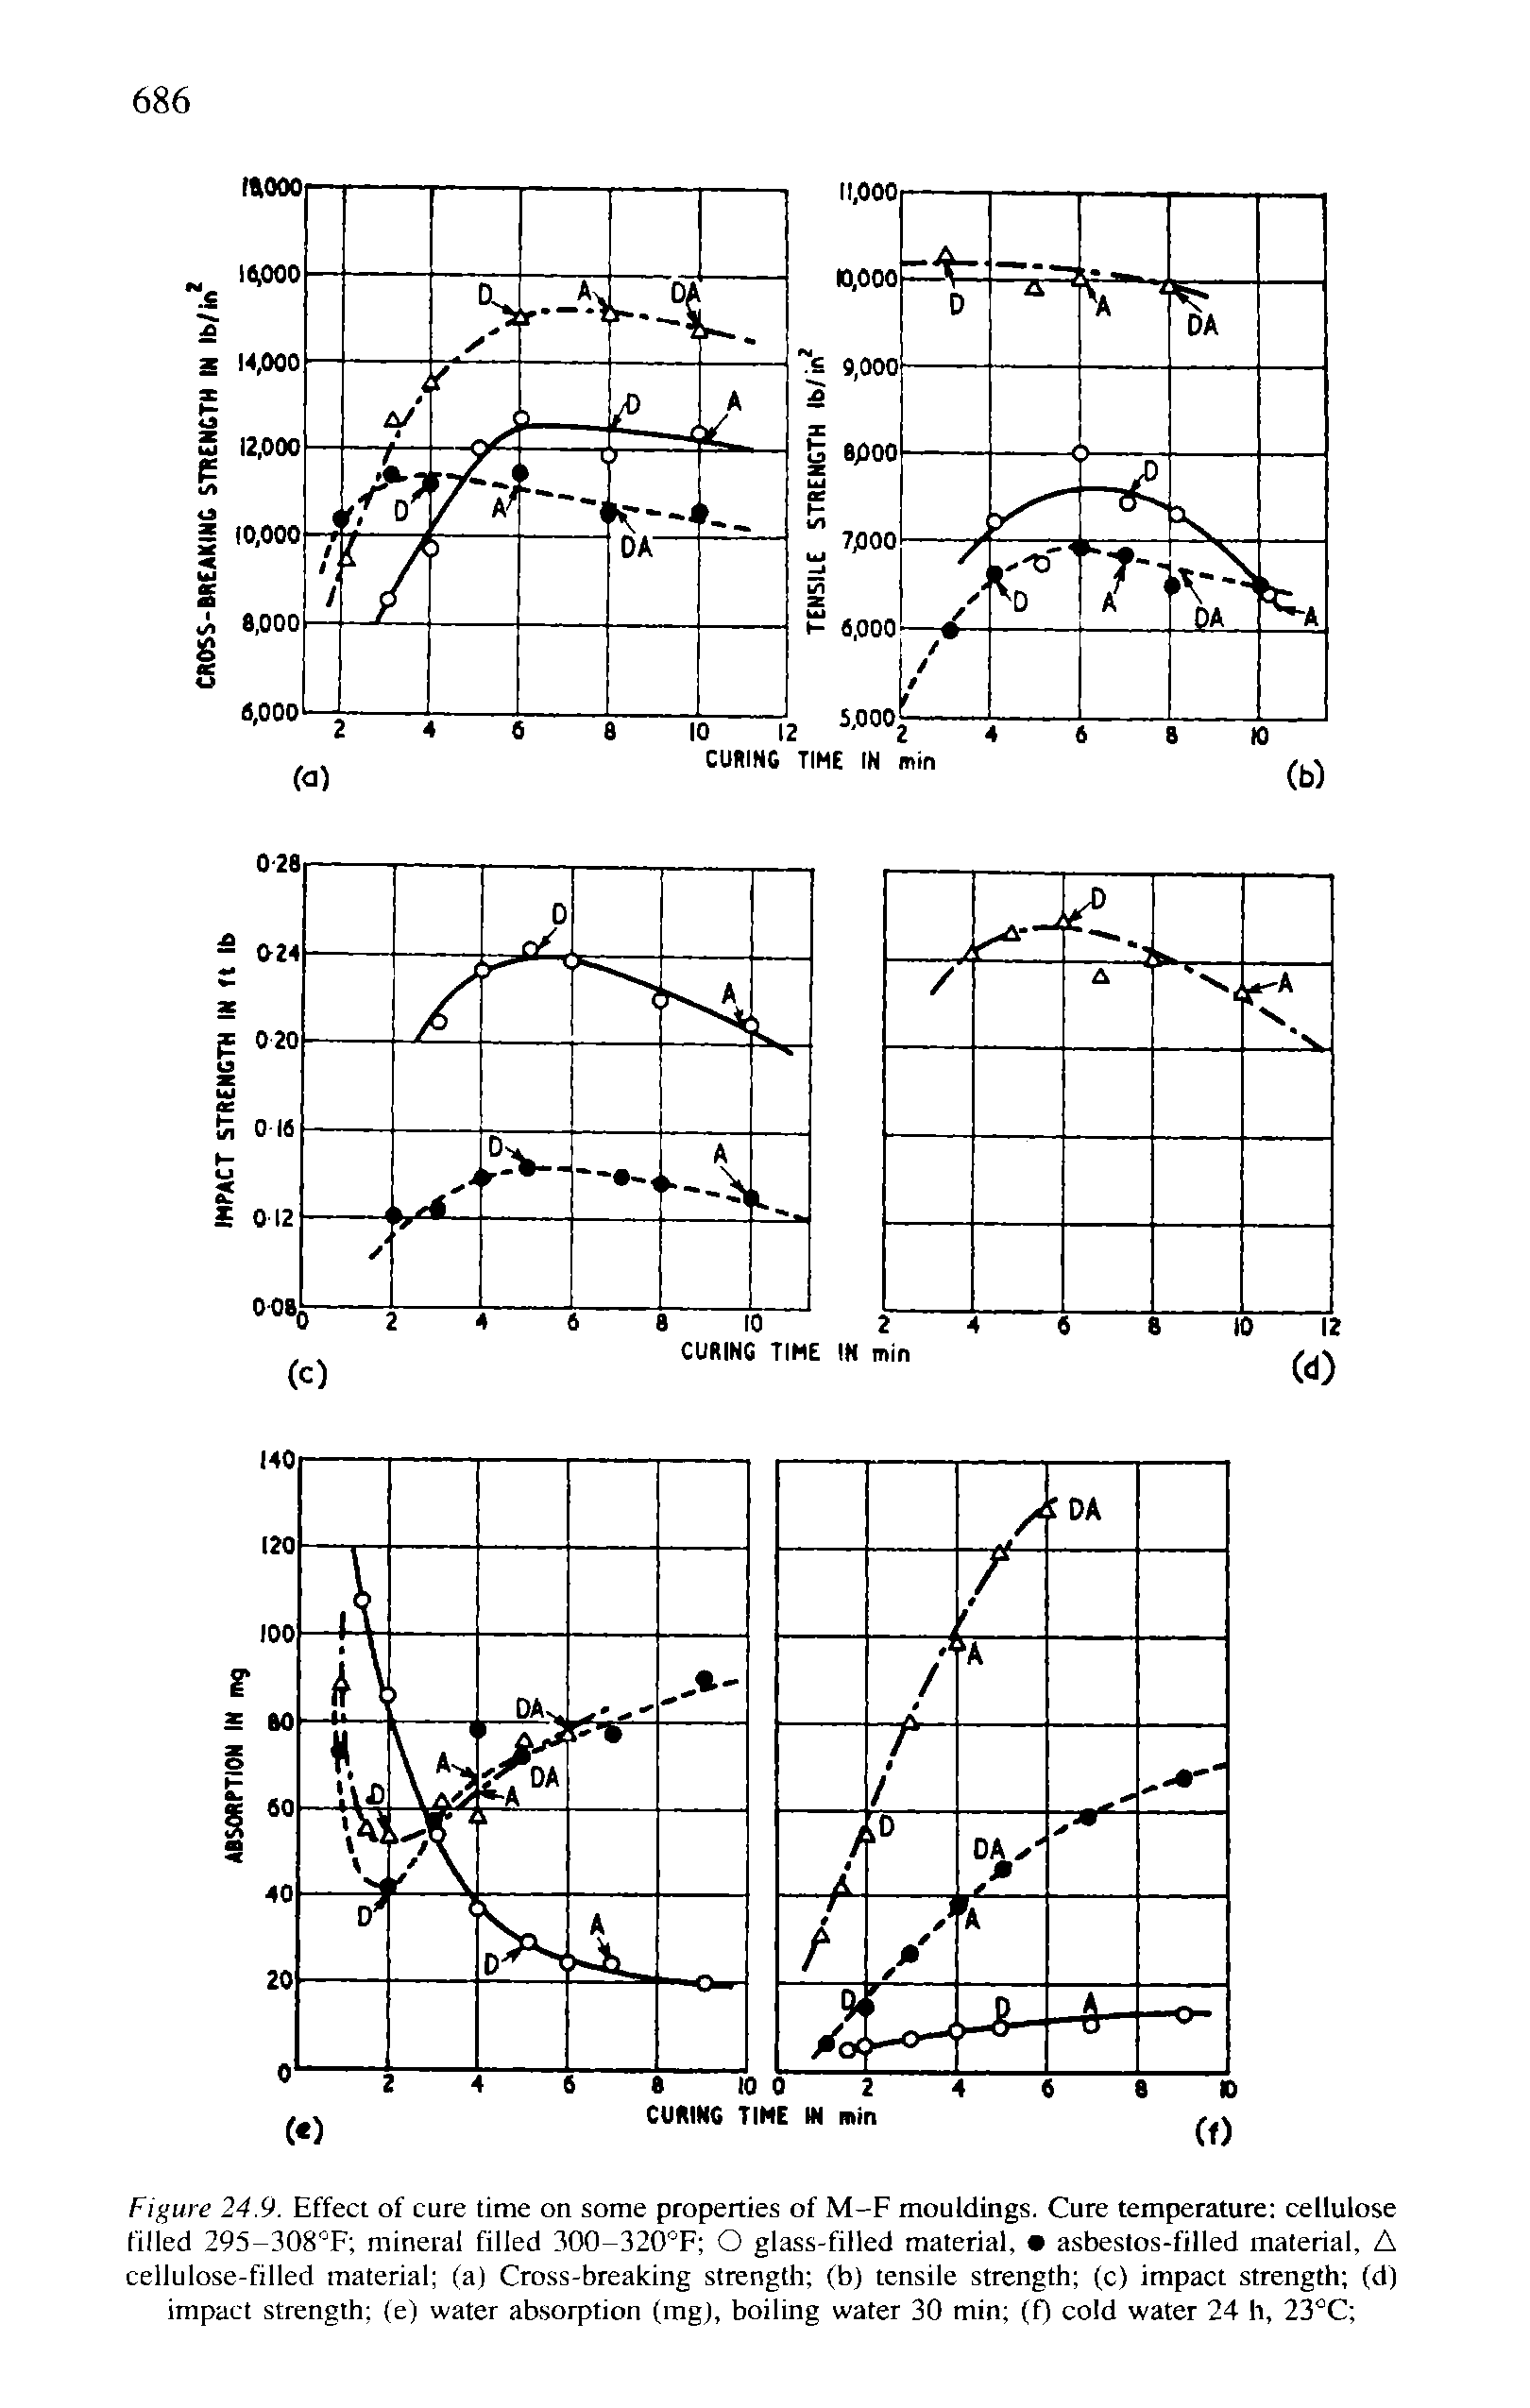 Figure 24.9. Effect of cure time on some properties of M-F mouldings. Cure temperature cellulose filled 295-308°F mineral filled 300-320°F O glass-filled material, asbestos-filled material, A cellulose-filled material (a) Cross-breaking strength (b) tensile strength (c) impact strength (d) impact strength (e) water absorption (rag), boiling water 30 min (f) cold water 24 h, 23°C ...